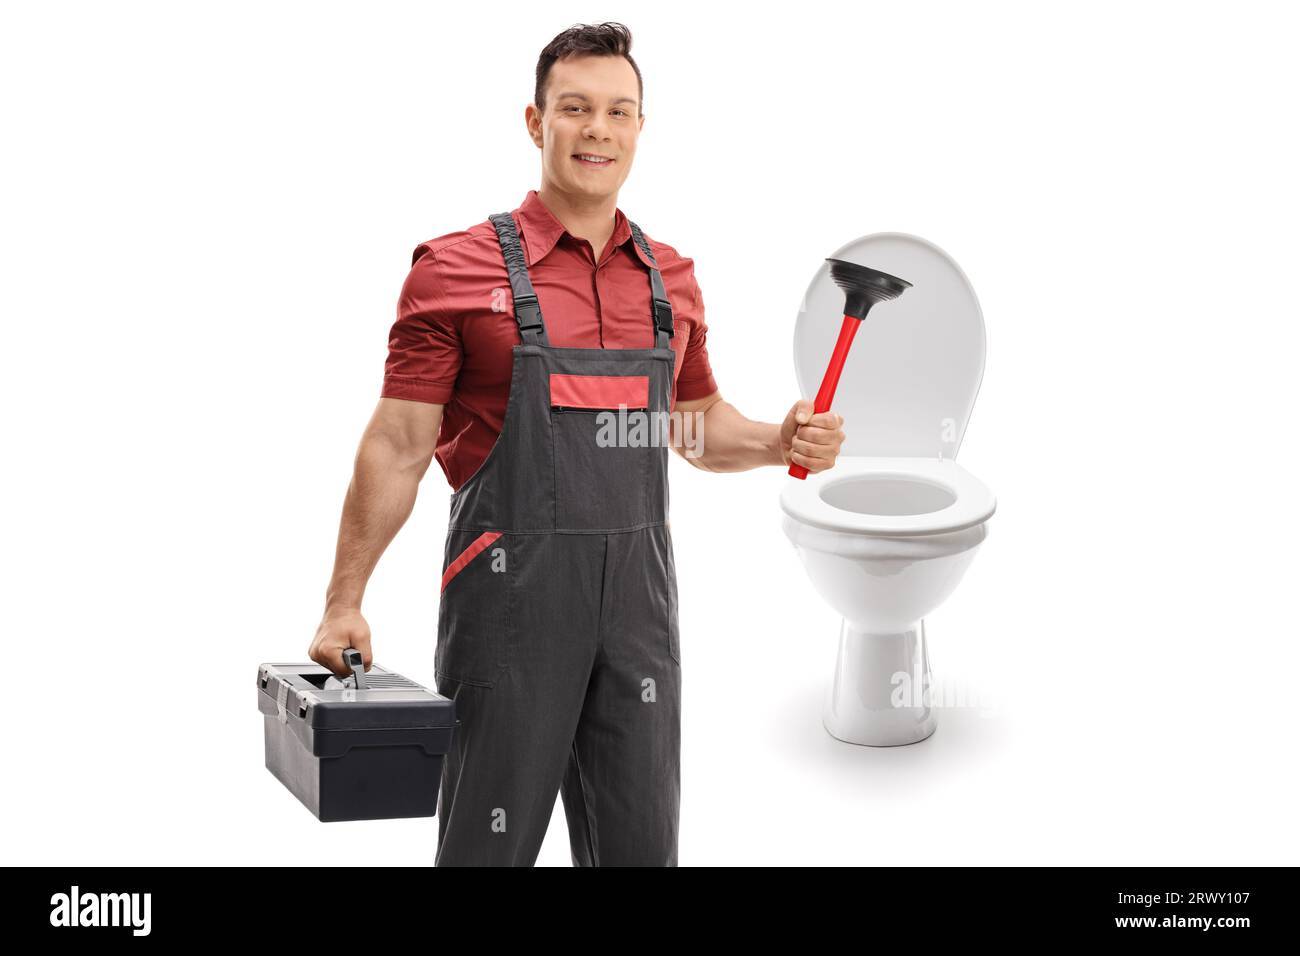 https://c8.alamy.com/comp/2RWY107/plumber-holding-a-tool-box-and-a-toilet-plunger-isolated-on-white-background-2RWY107.jpg